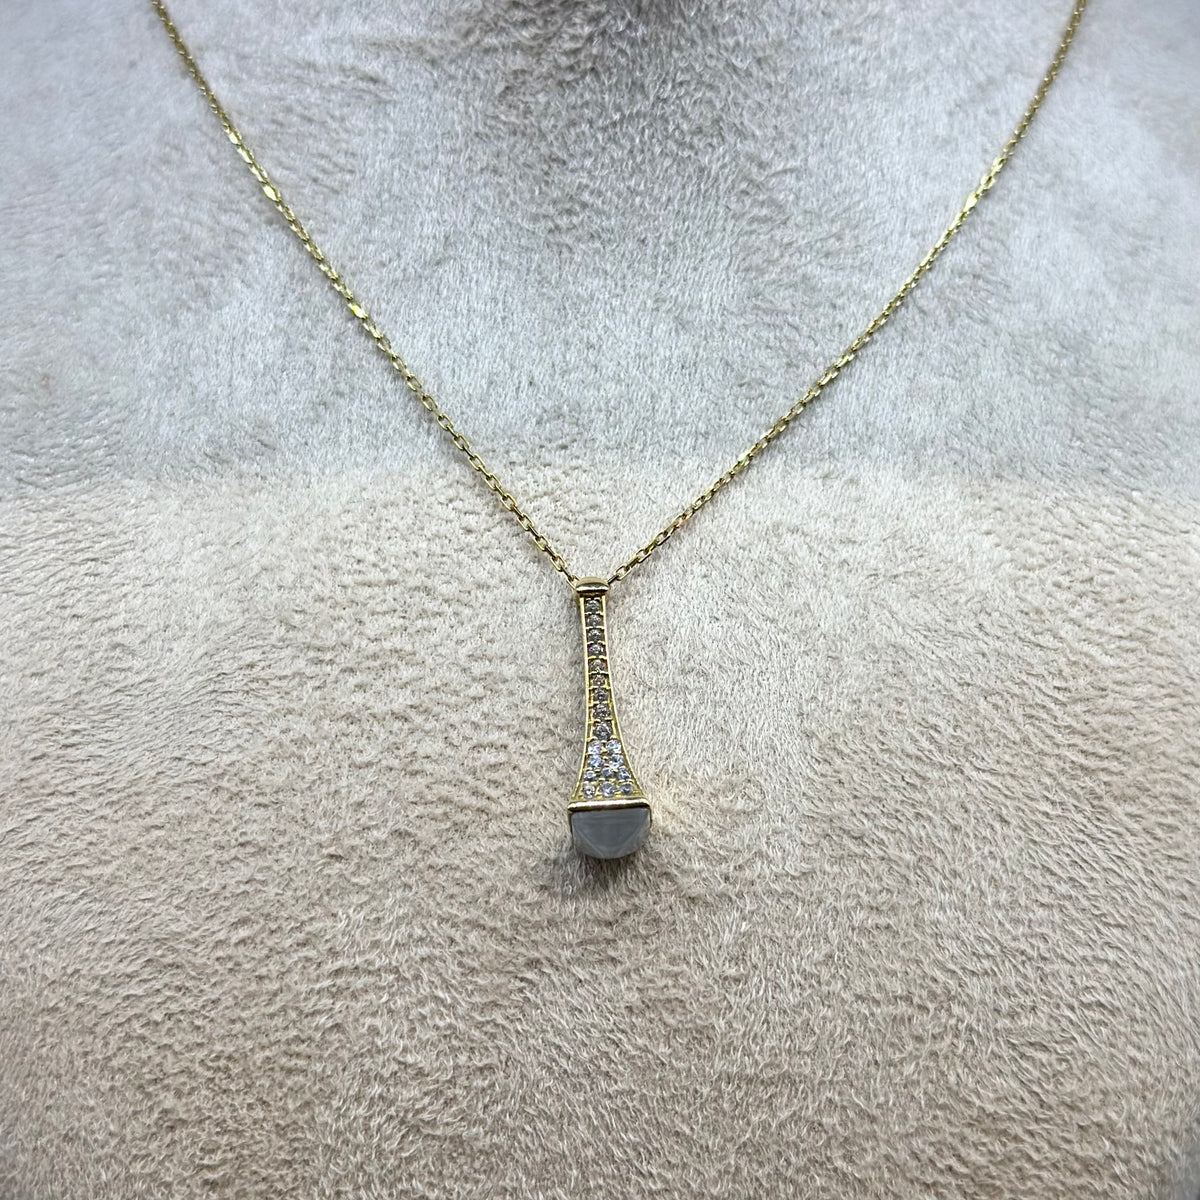 Real 18K Yellow Gold - SJMRLI White MOP Necklace